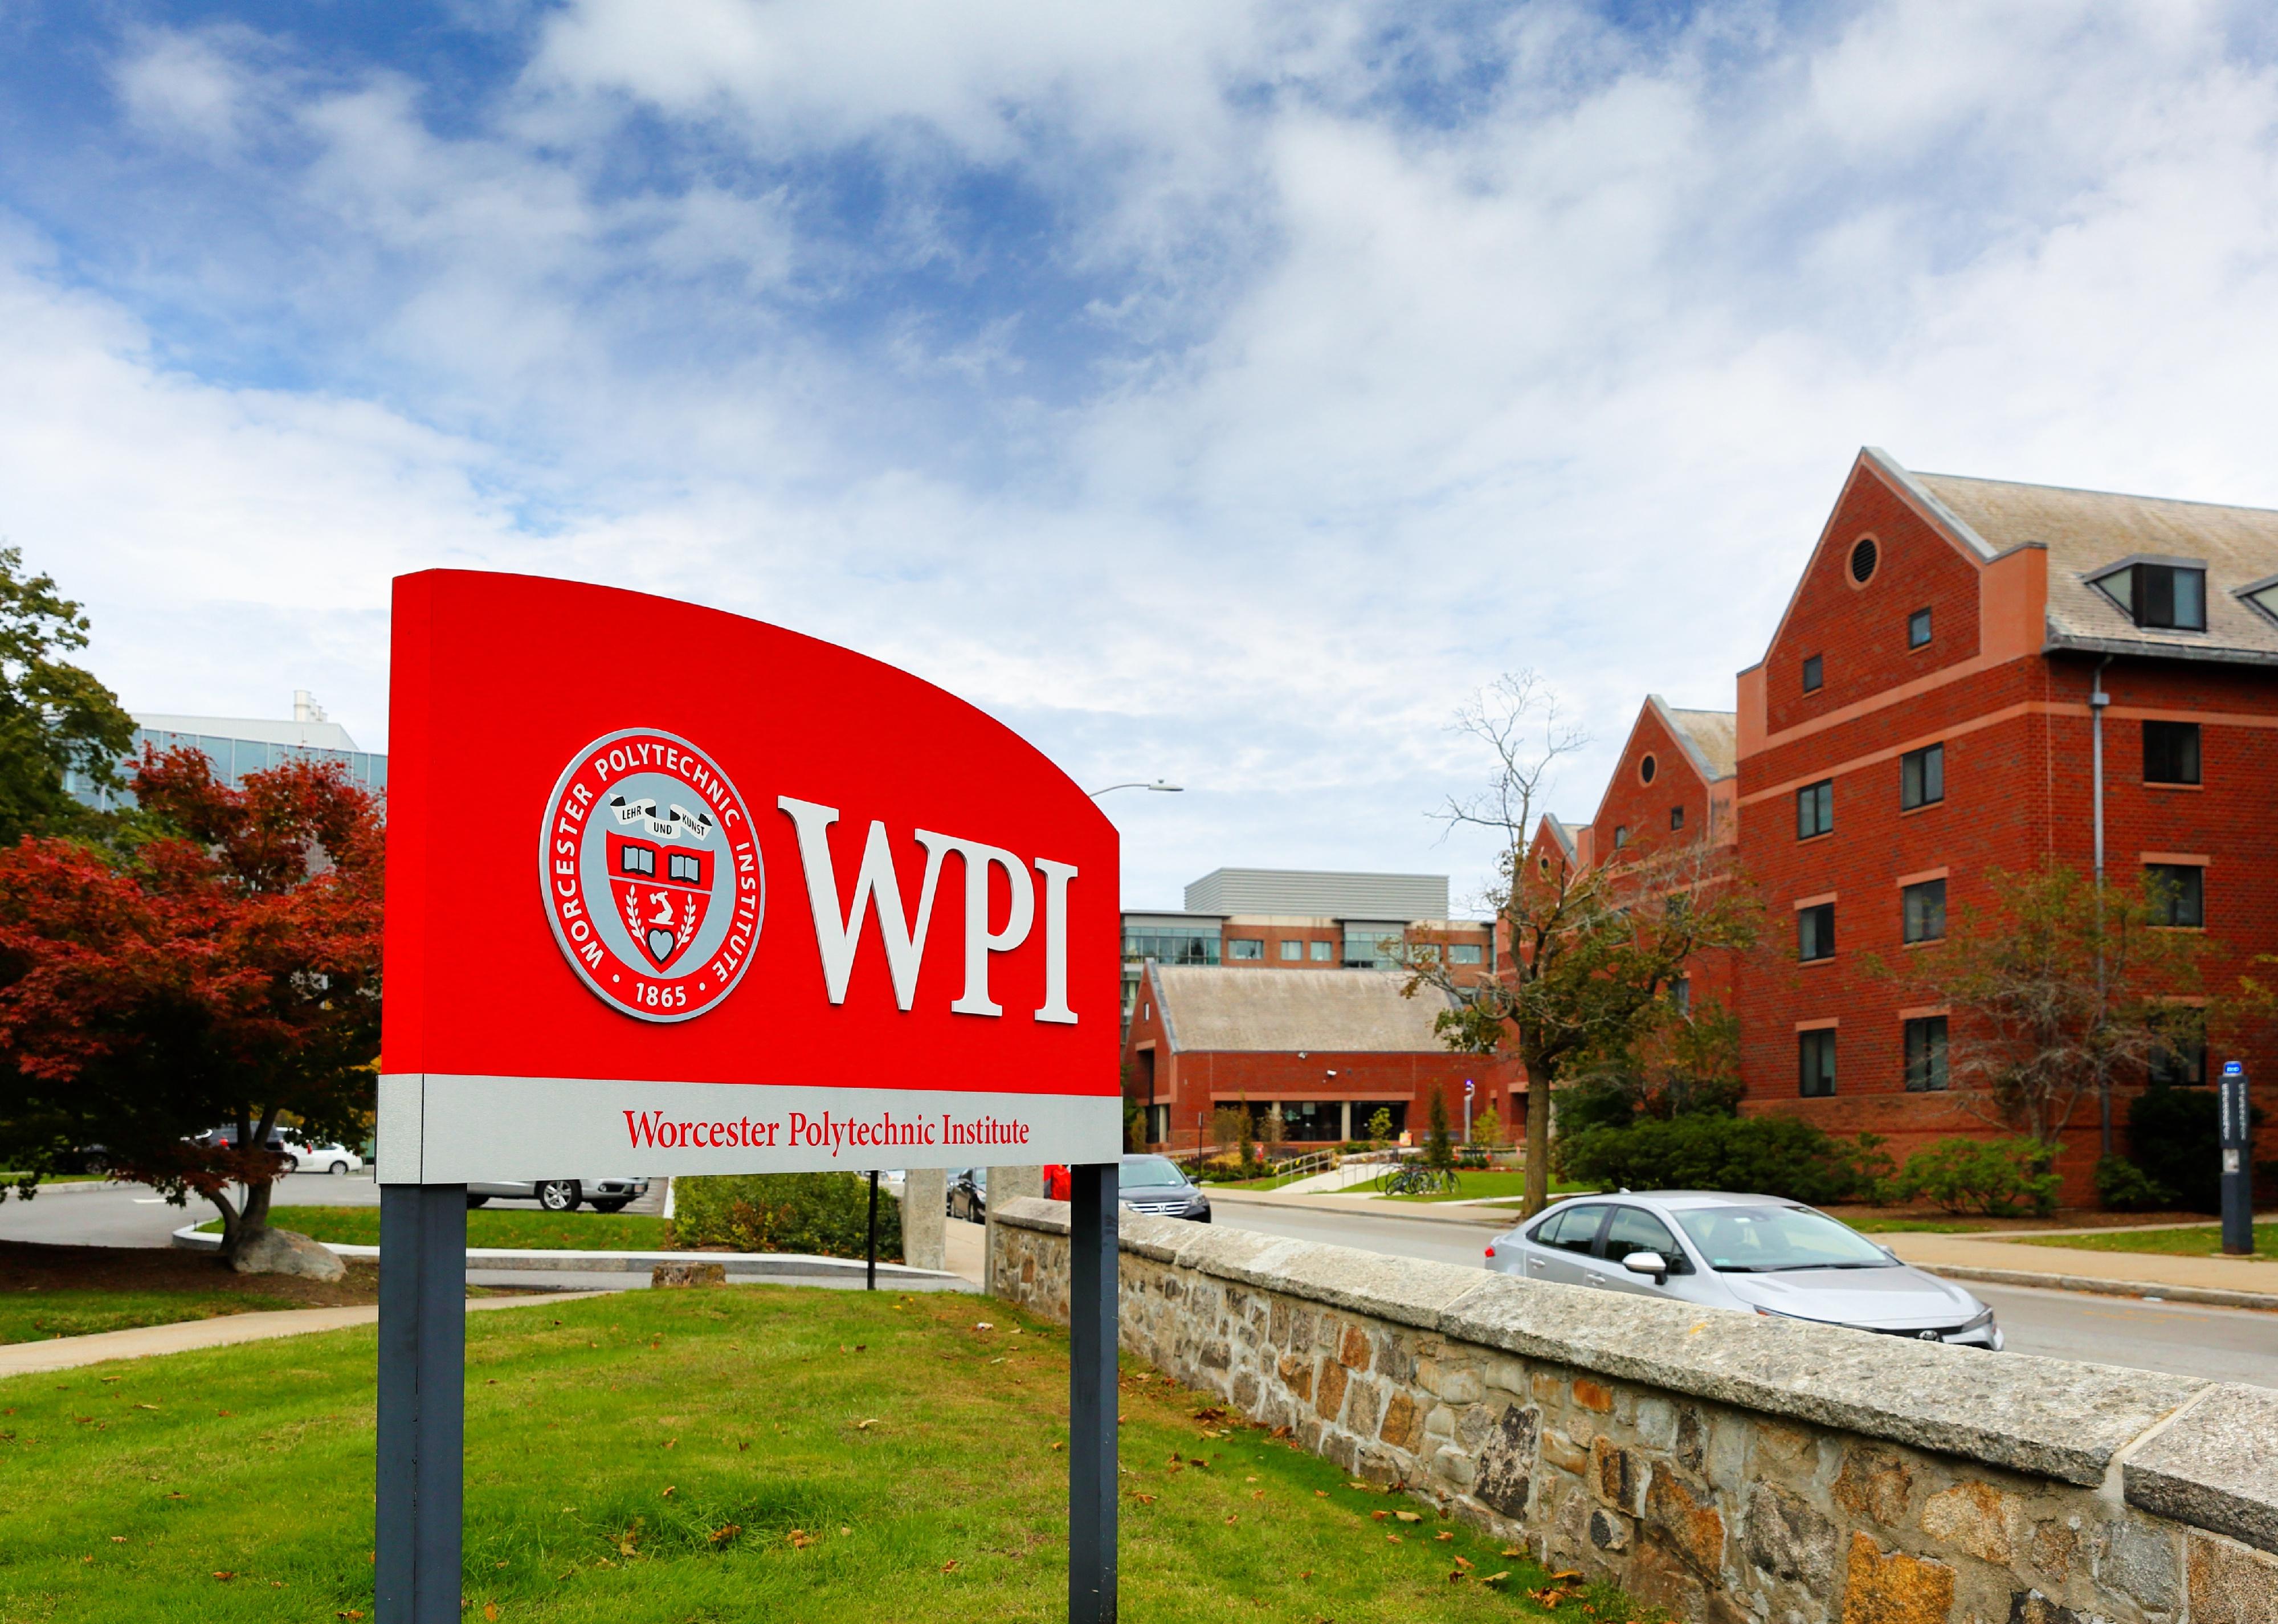 The entrance sign of Worcester Polytechnic Institute.